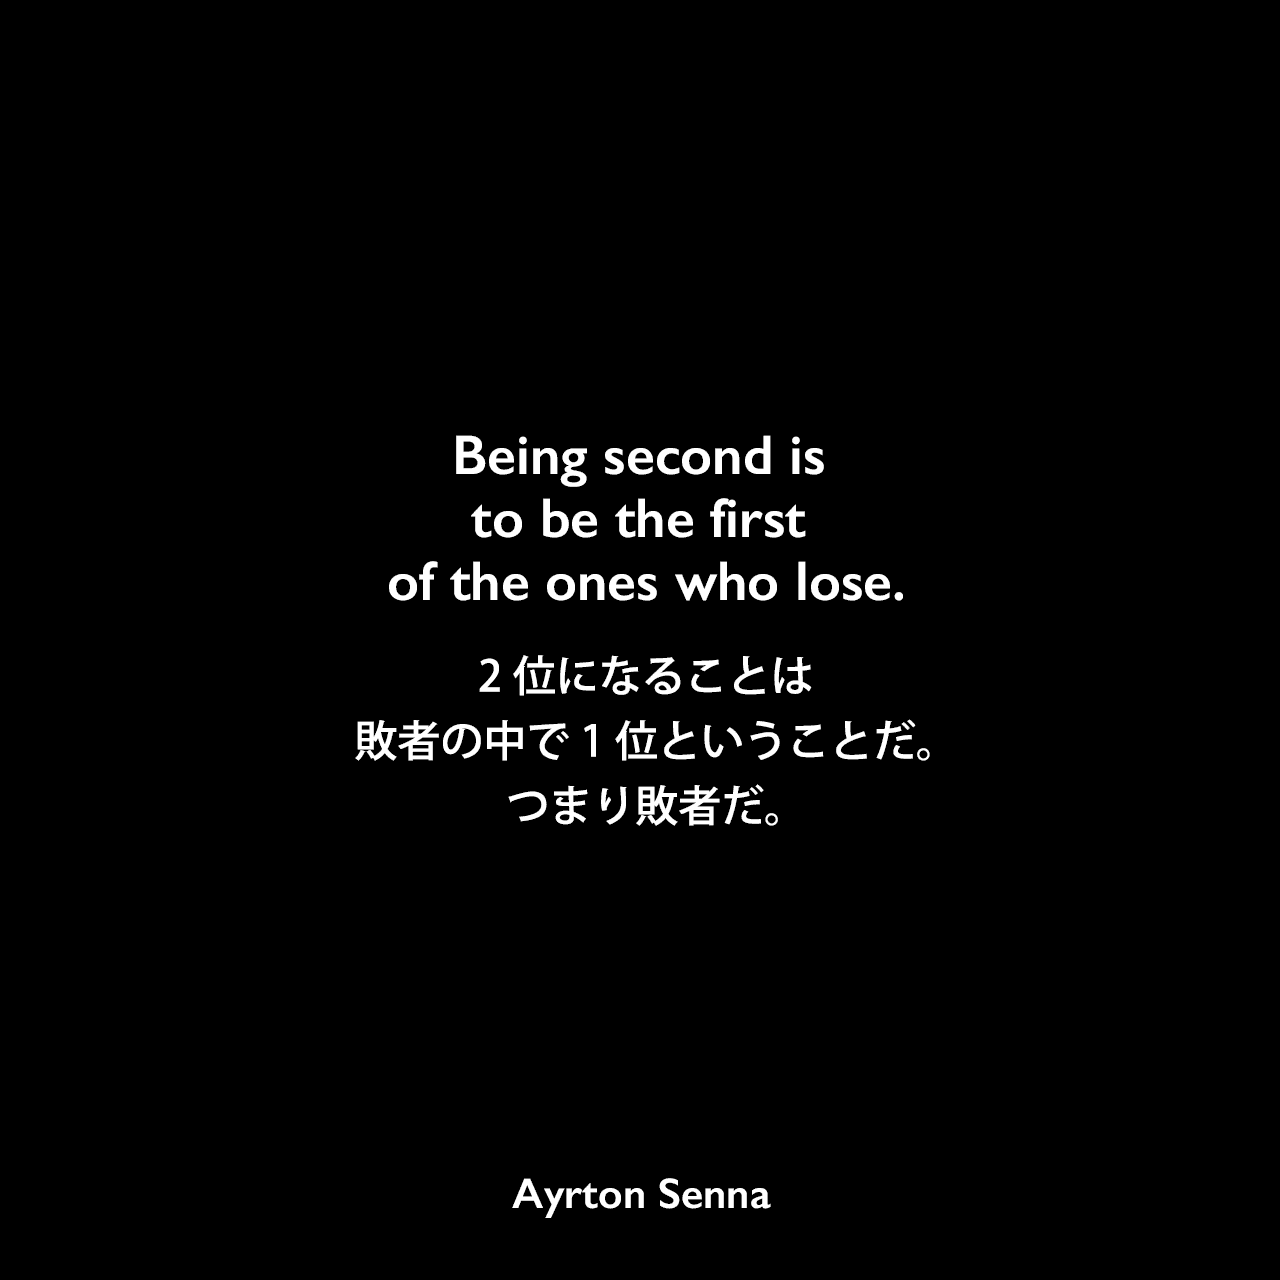 Being second is to be the first of the ones who lose.2位になることは、敗者の中で1位ということだ。つまり敗者だ。Ayrton Senna